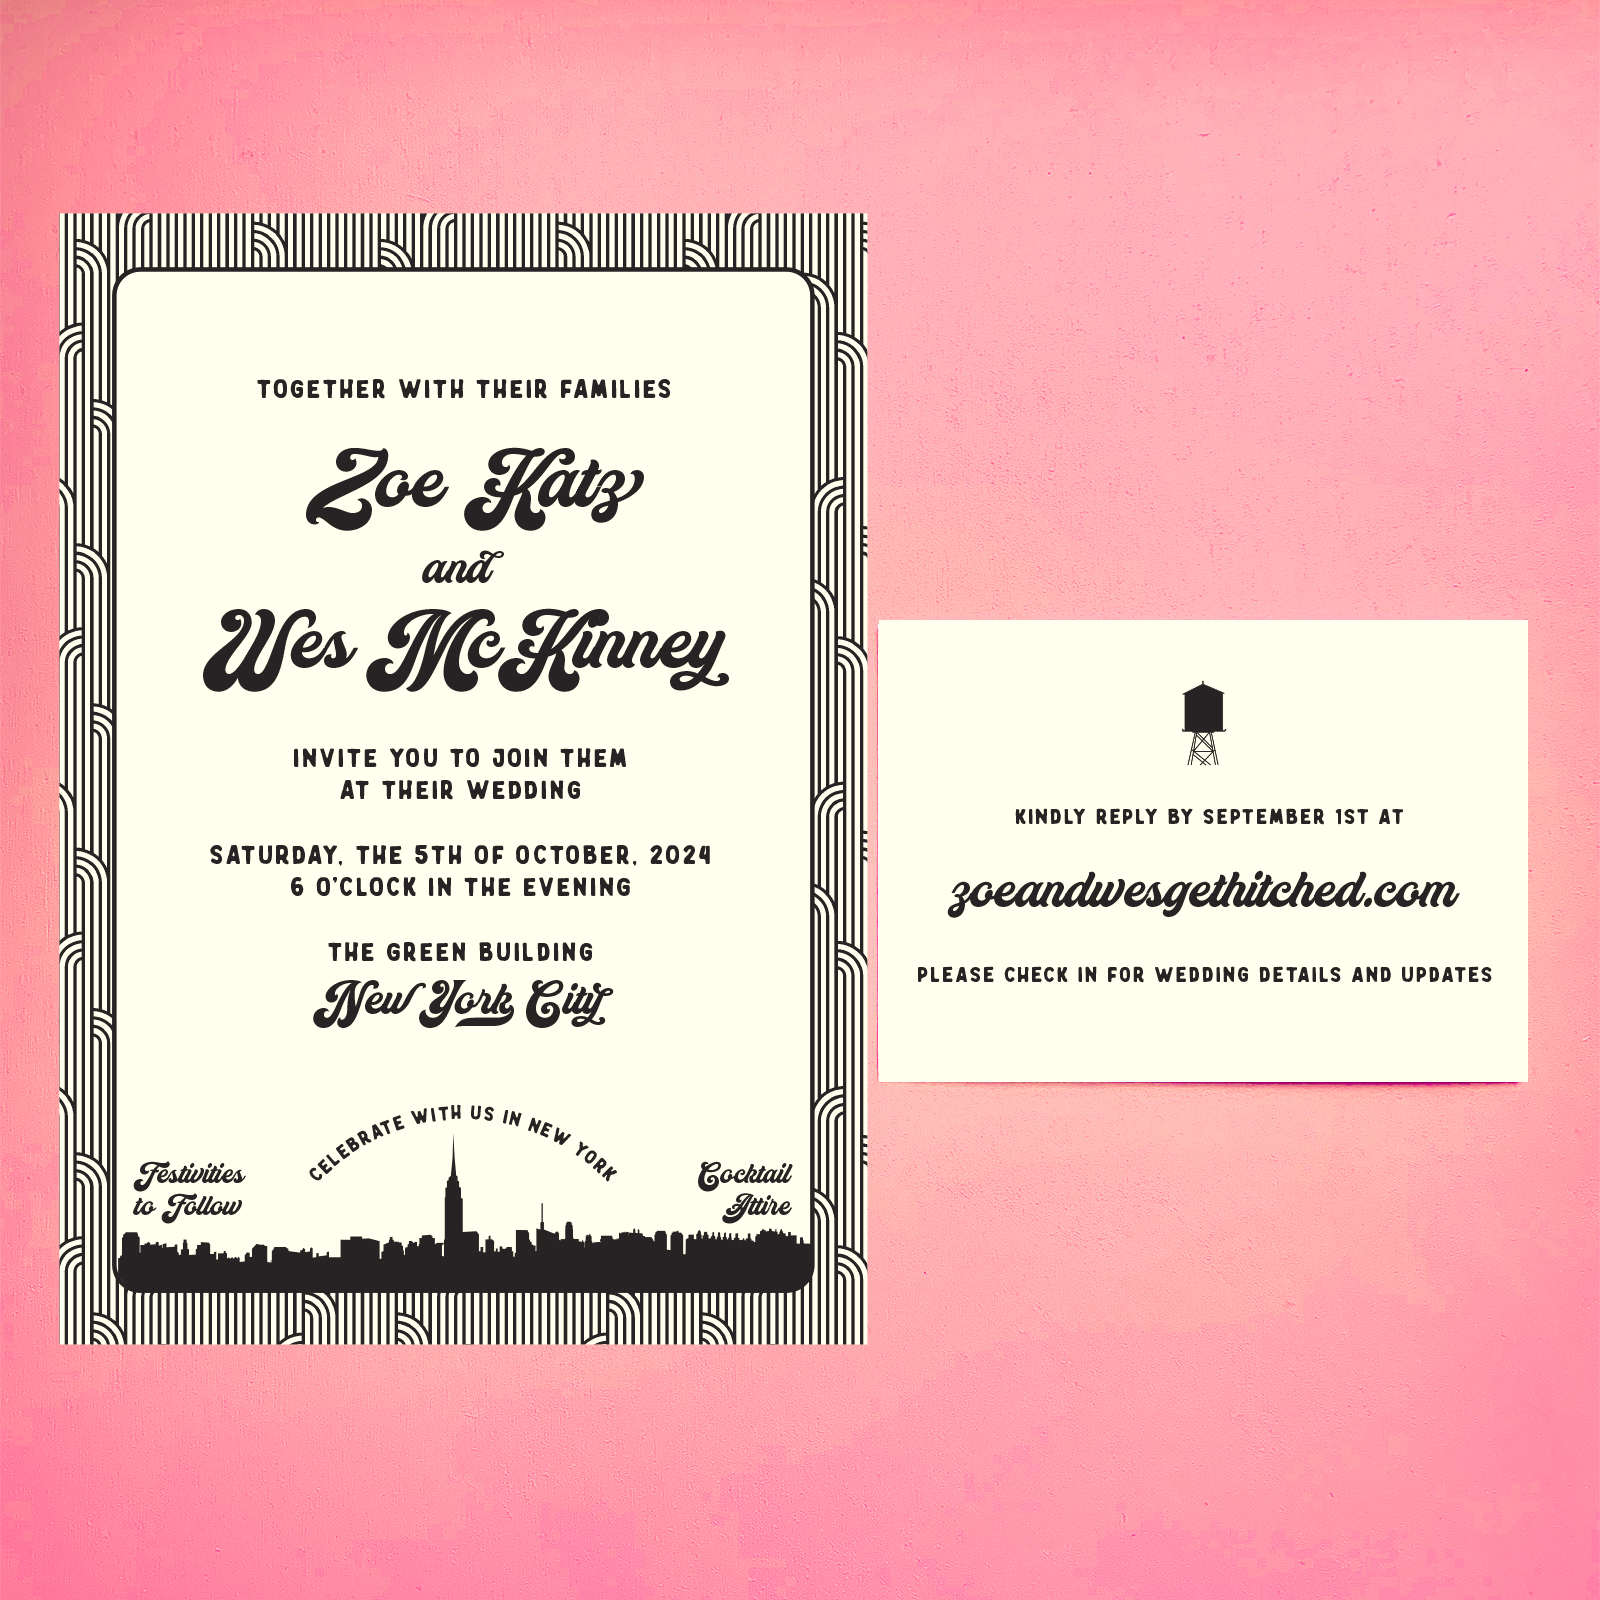 An elegant and timeless letterpress wedding invitation featuring retro type and New York City skyline